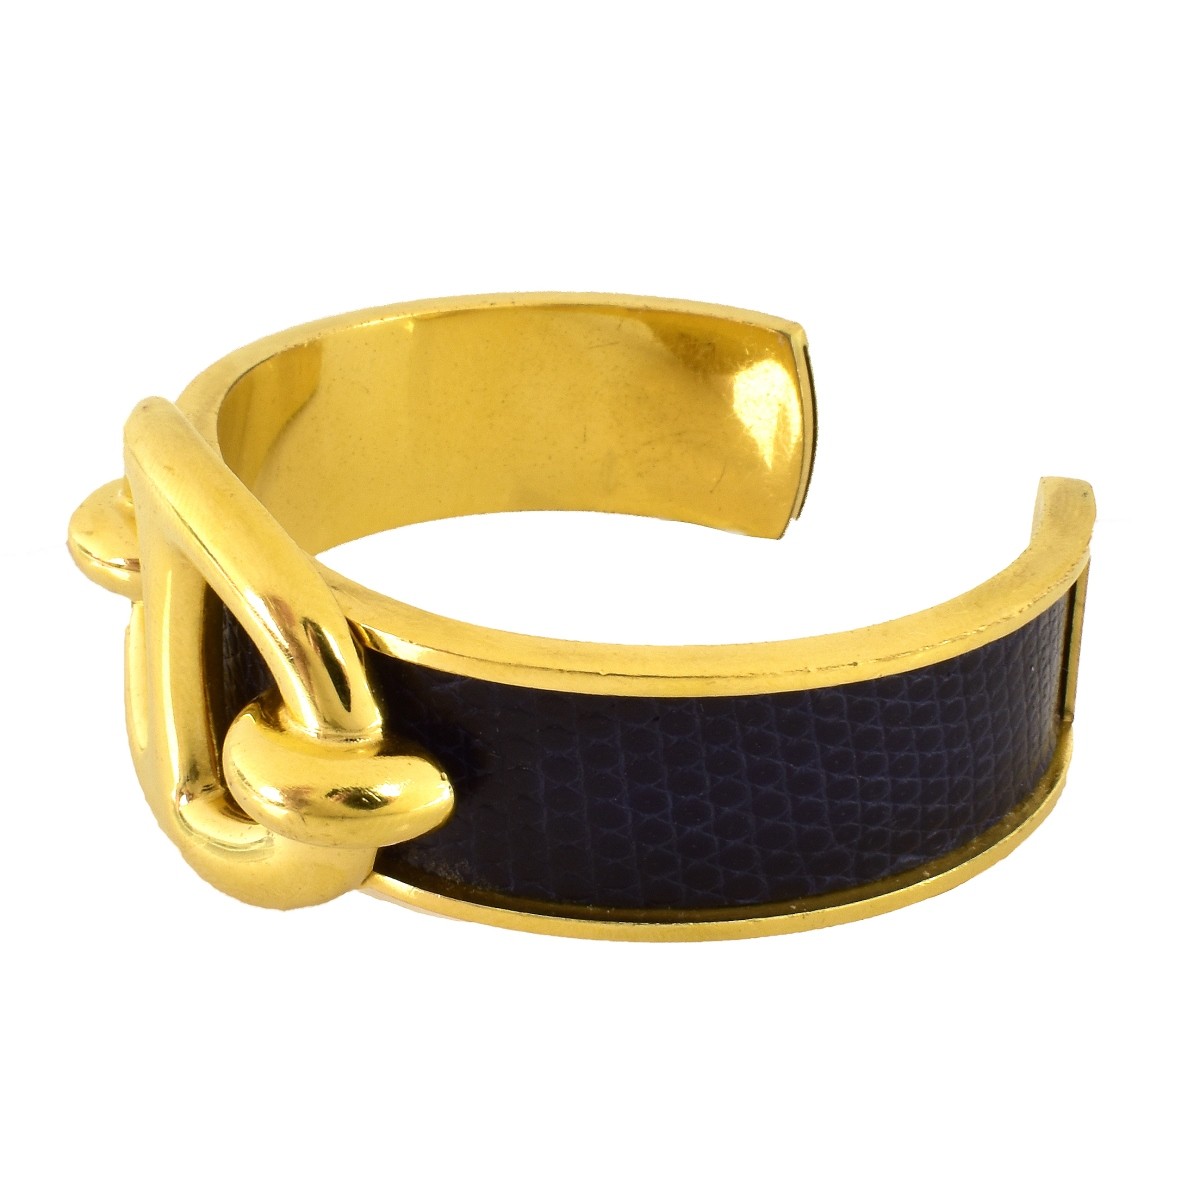 Hermes Gold Plated and Leather Cuff Bracelet